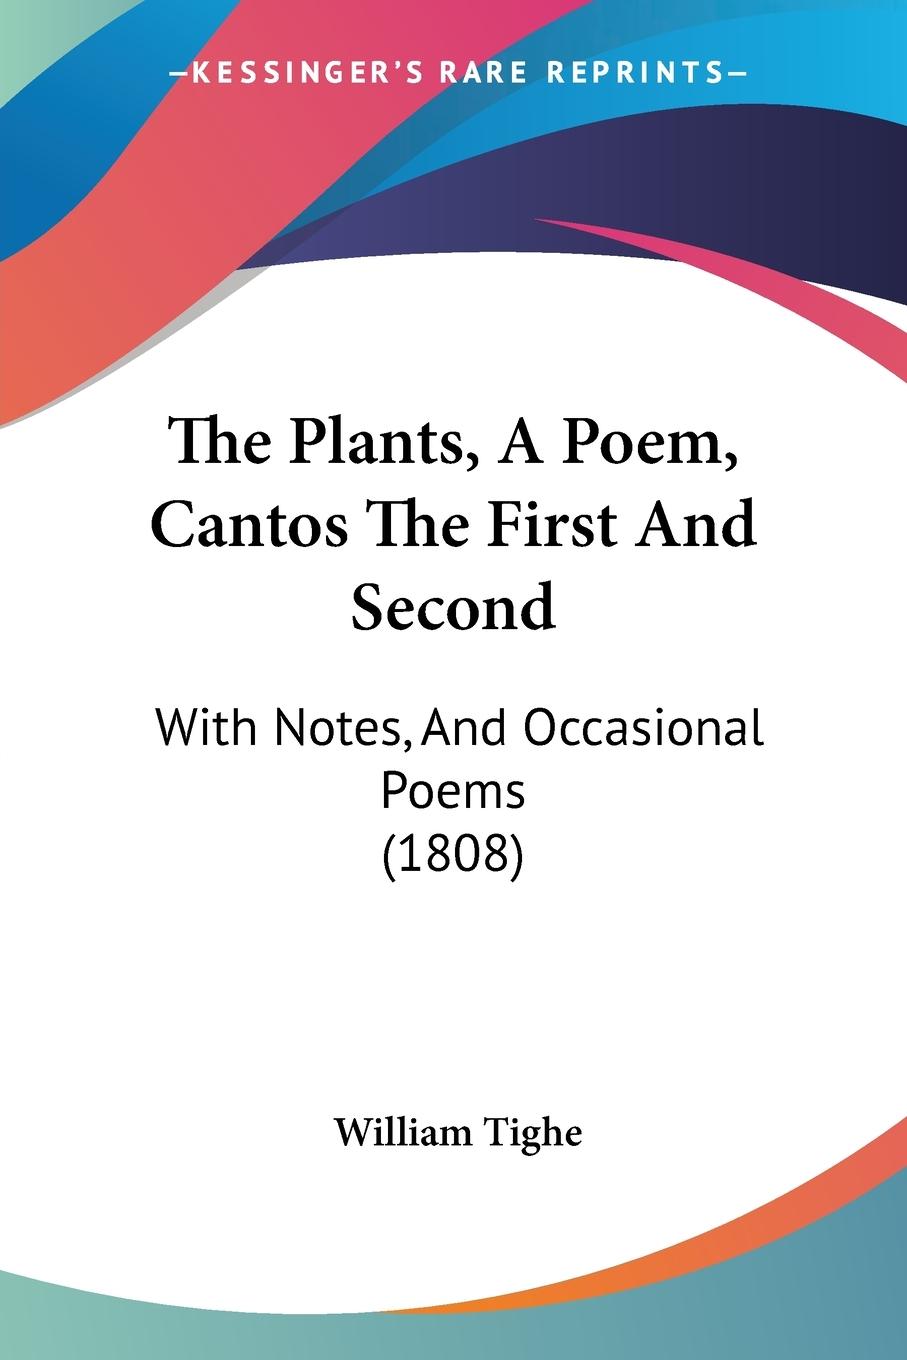 The Plants, A Poem, Cantos The First And Second - Tighe, William